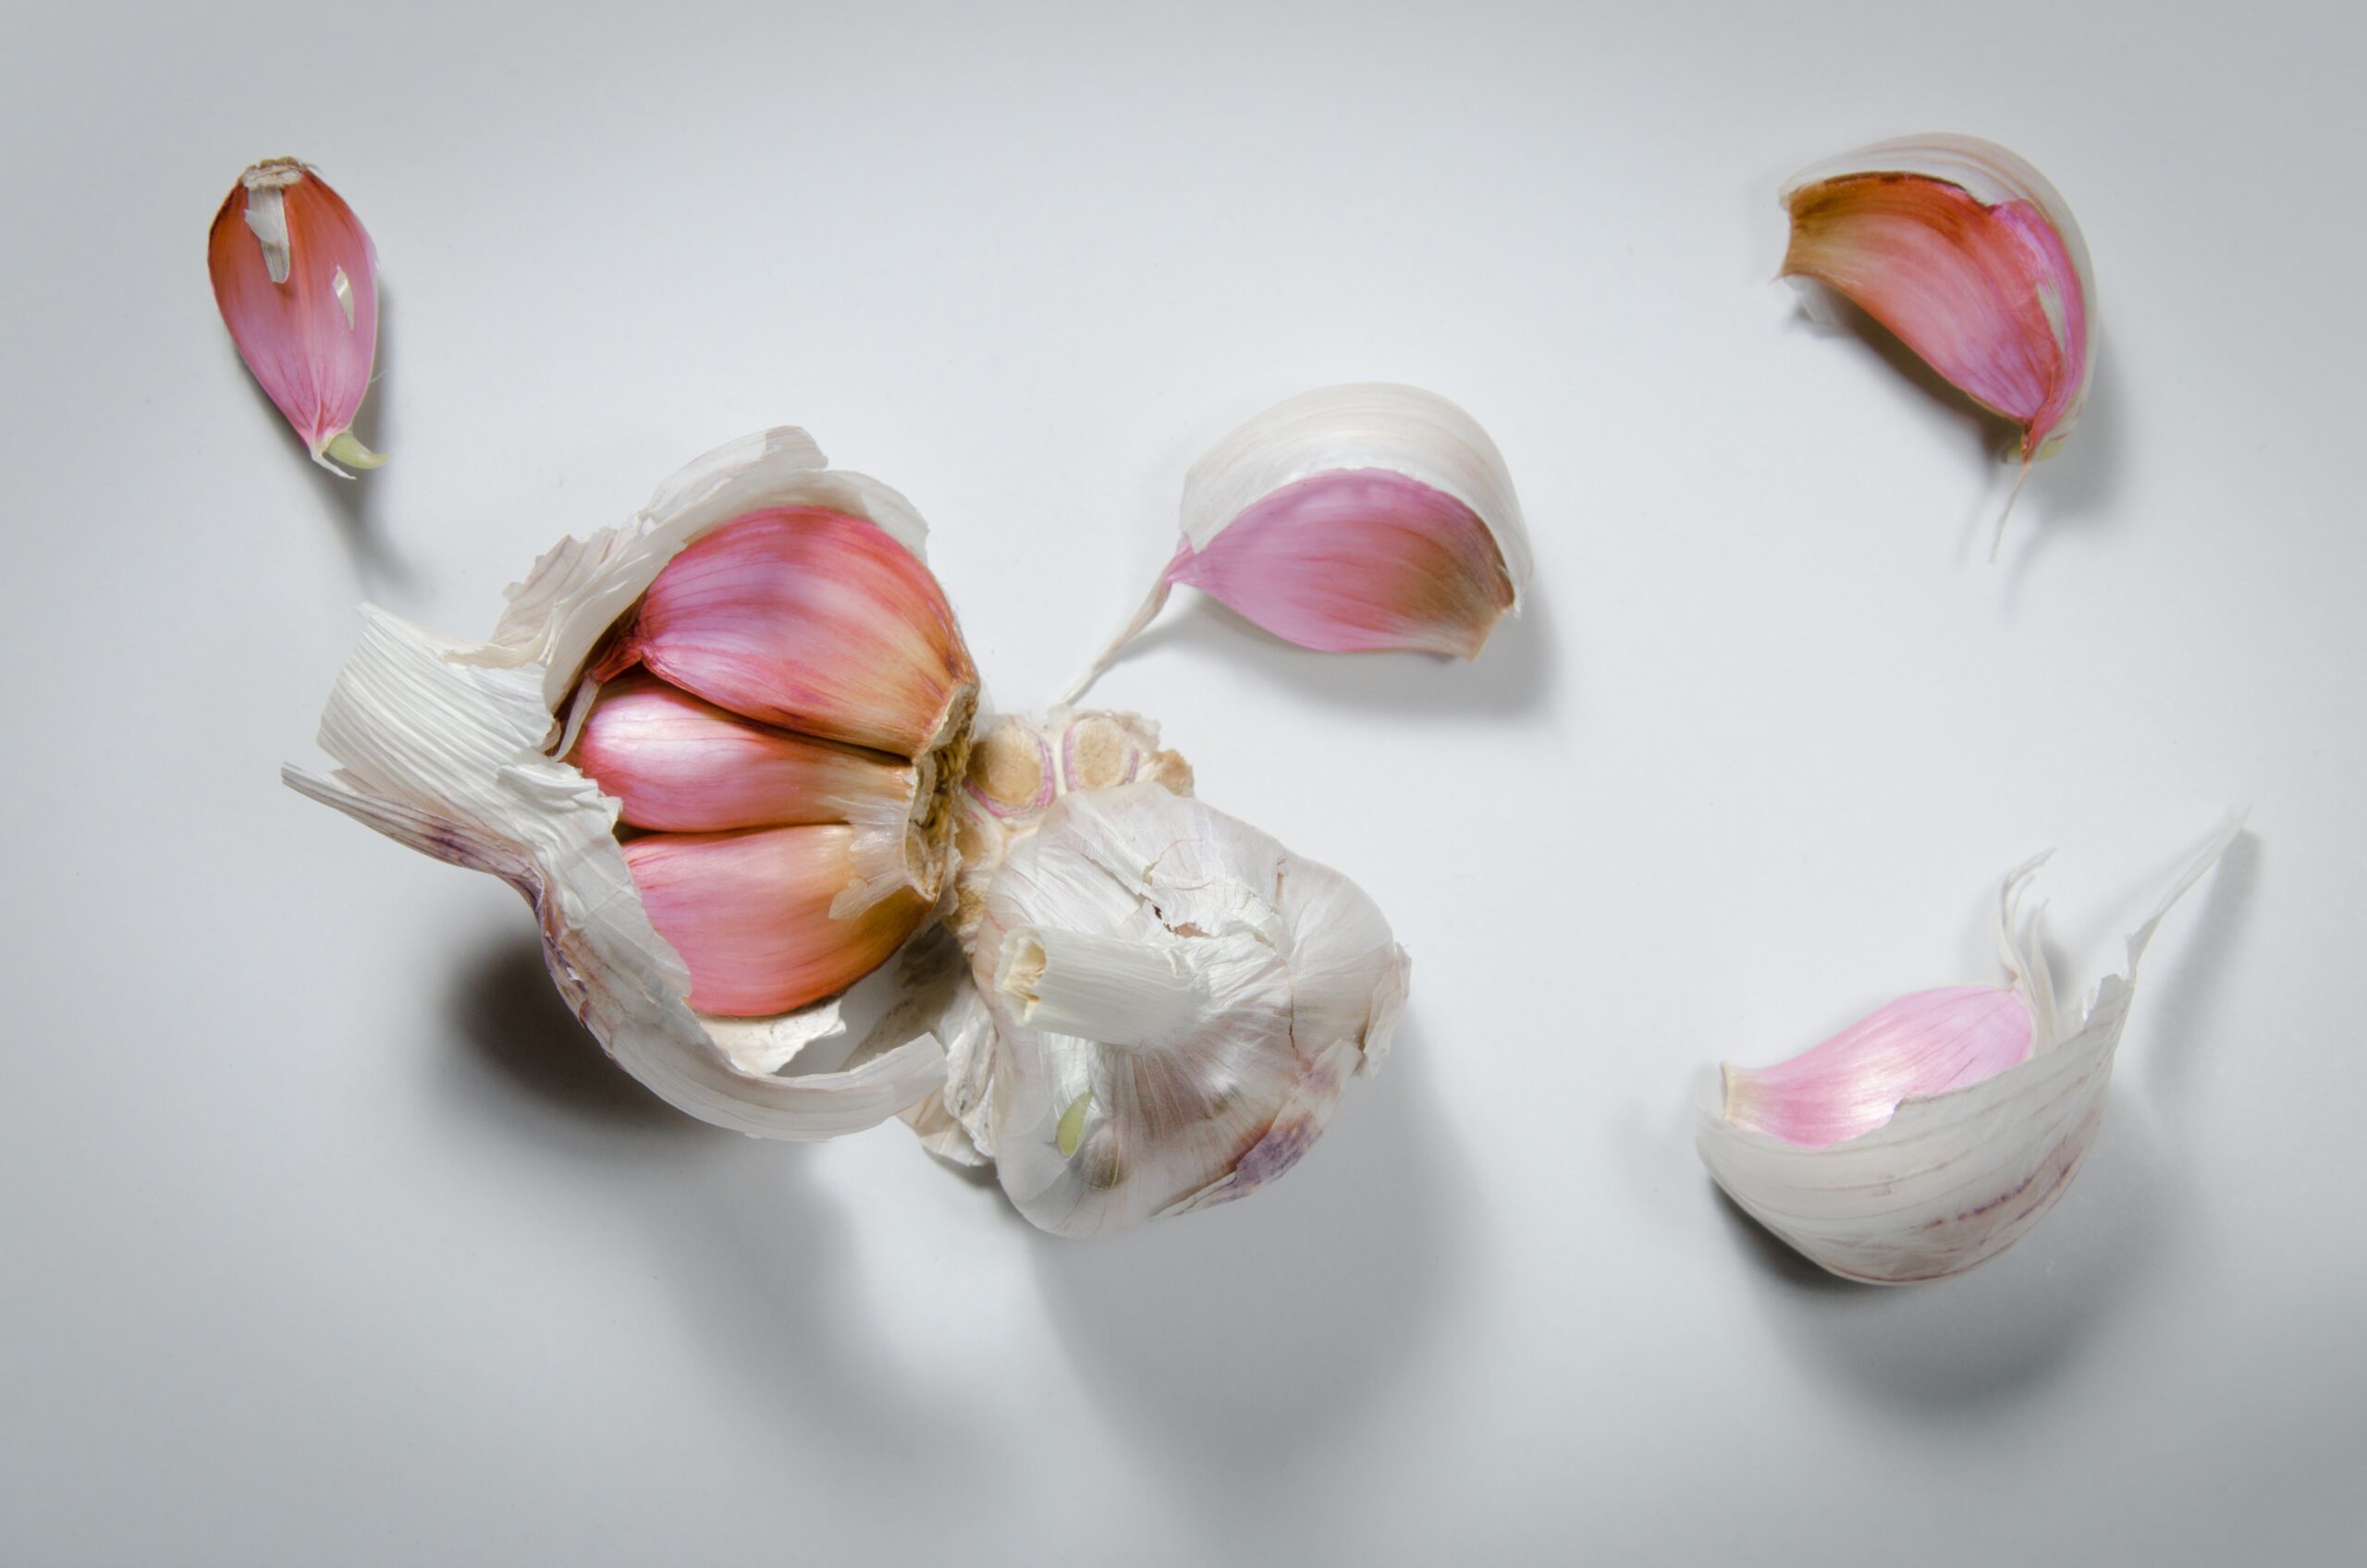 a photo of garlic and how to speed up your metabolism after 40